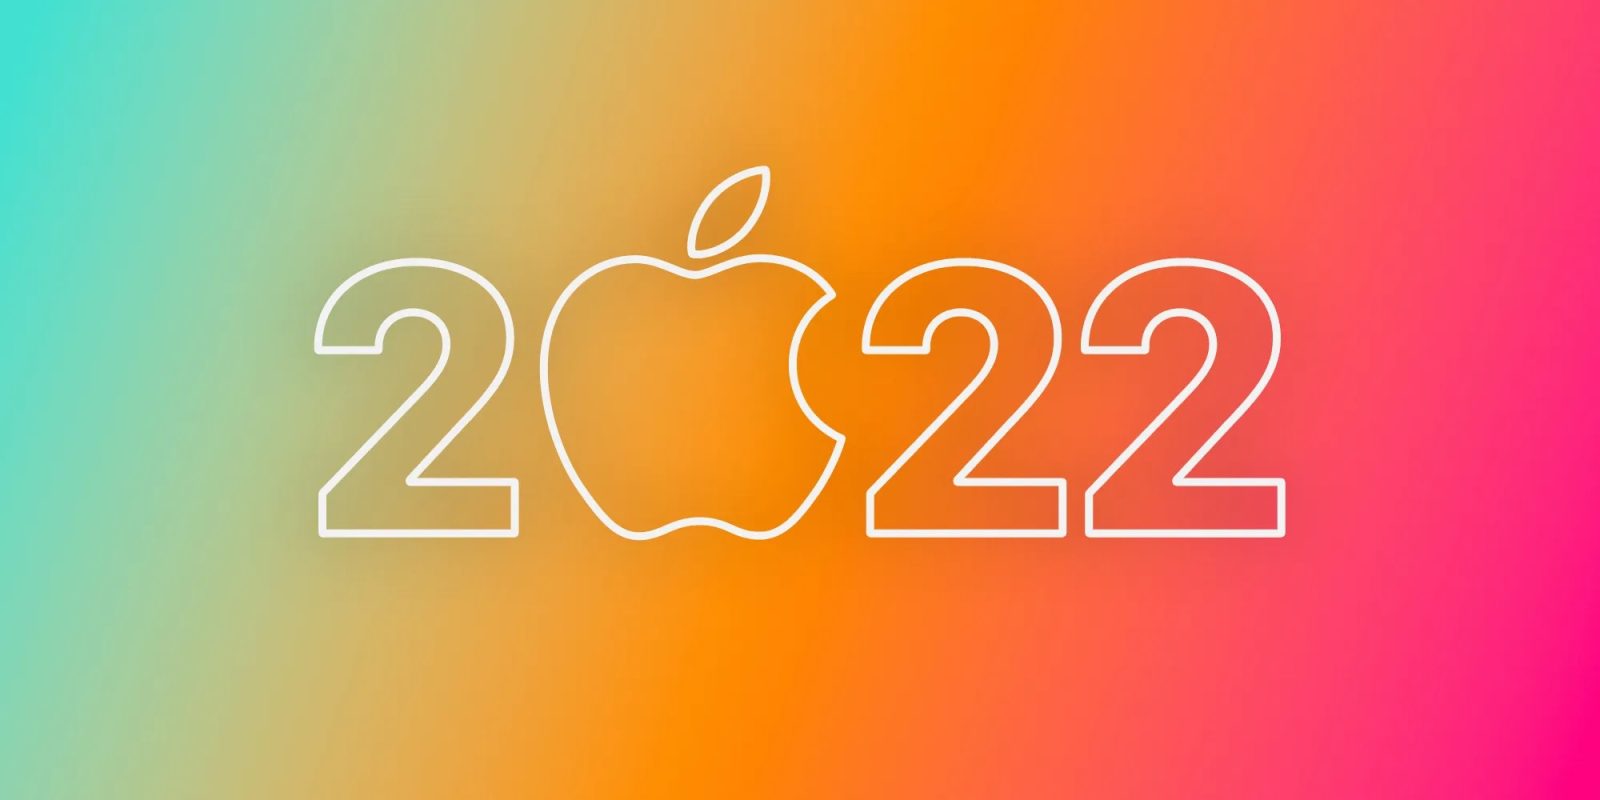 Here’s everything still to come from Apple in 2022